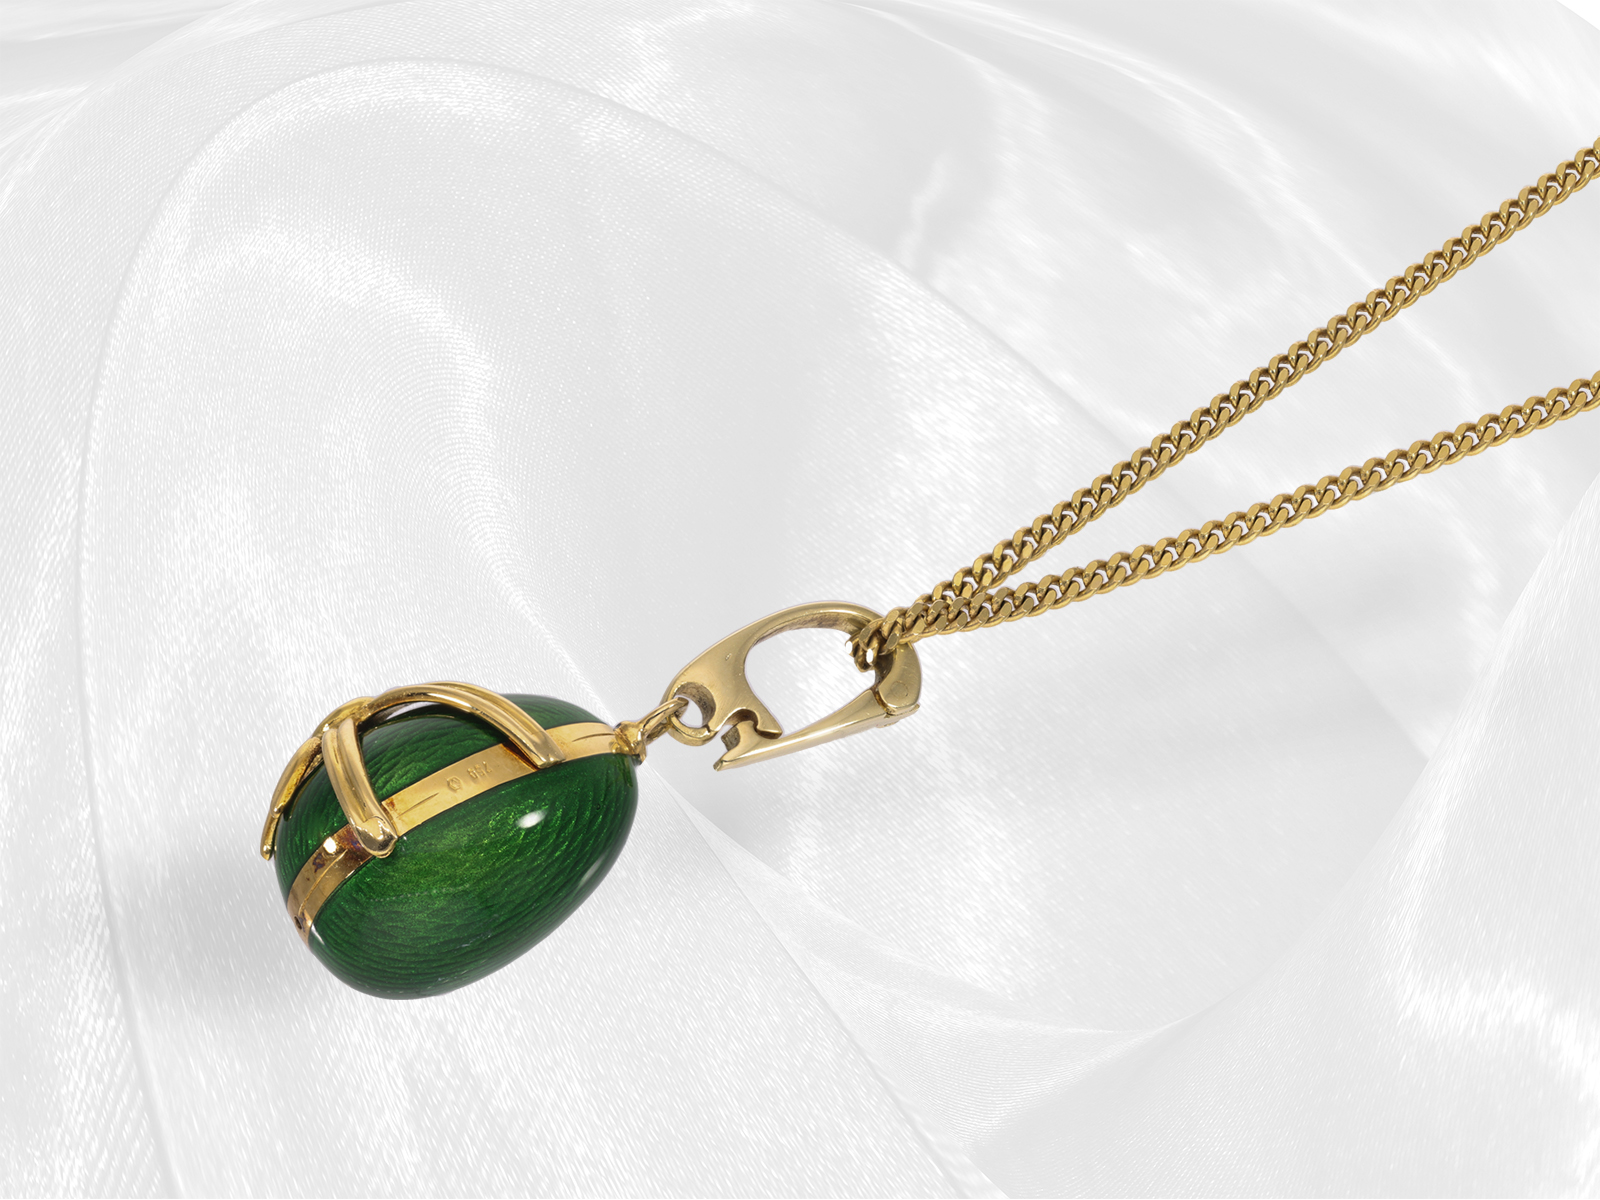 High-quality Fabergé enamel pendant with brilliant-cut diamonds, 18K gold, limited edition, with nec - Image 7 of 12